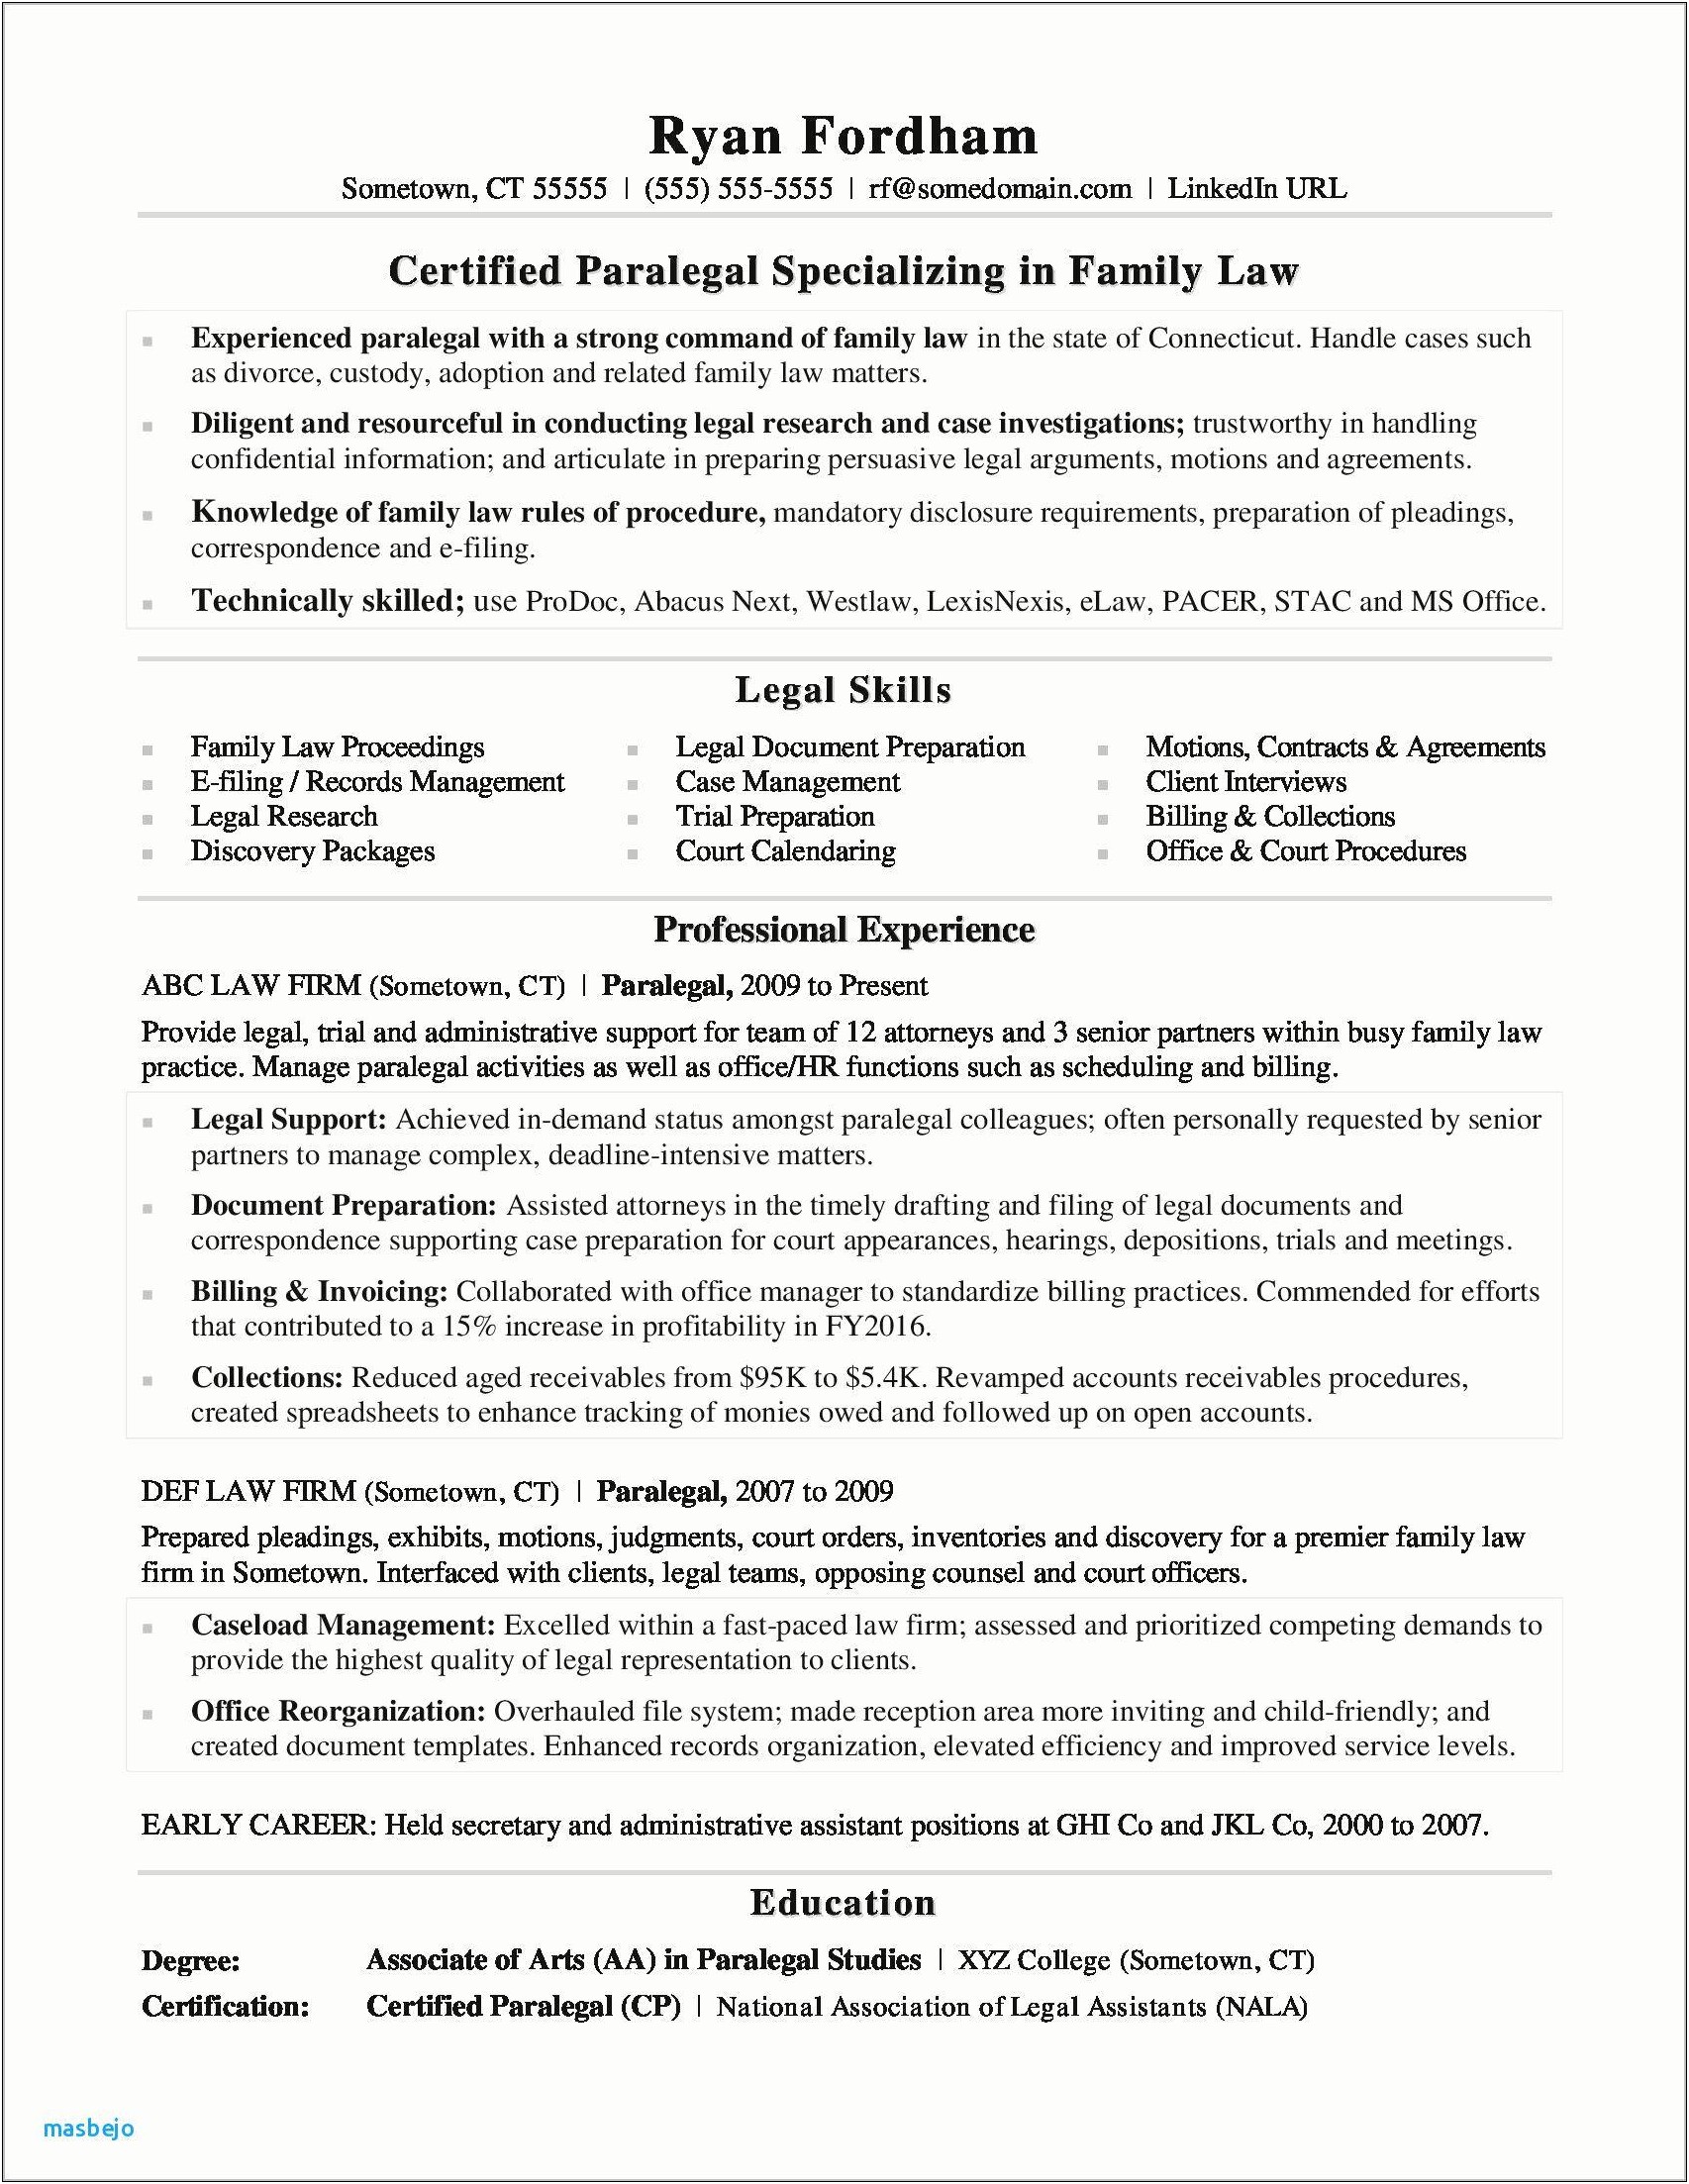 Example Federal Resume For Administative Specialist